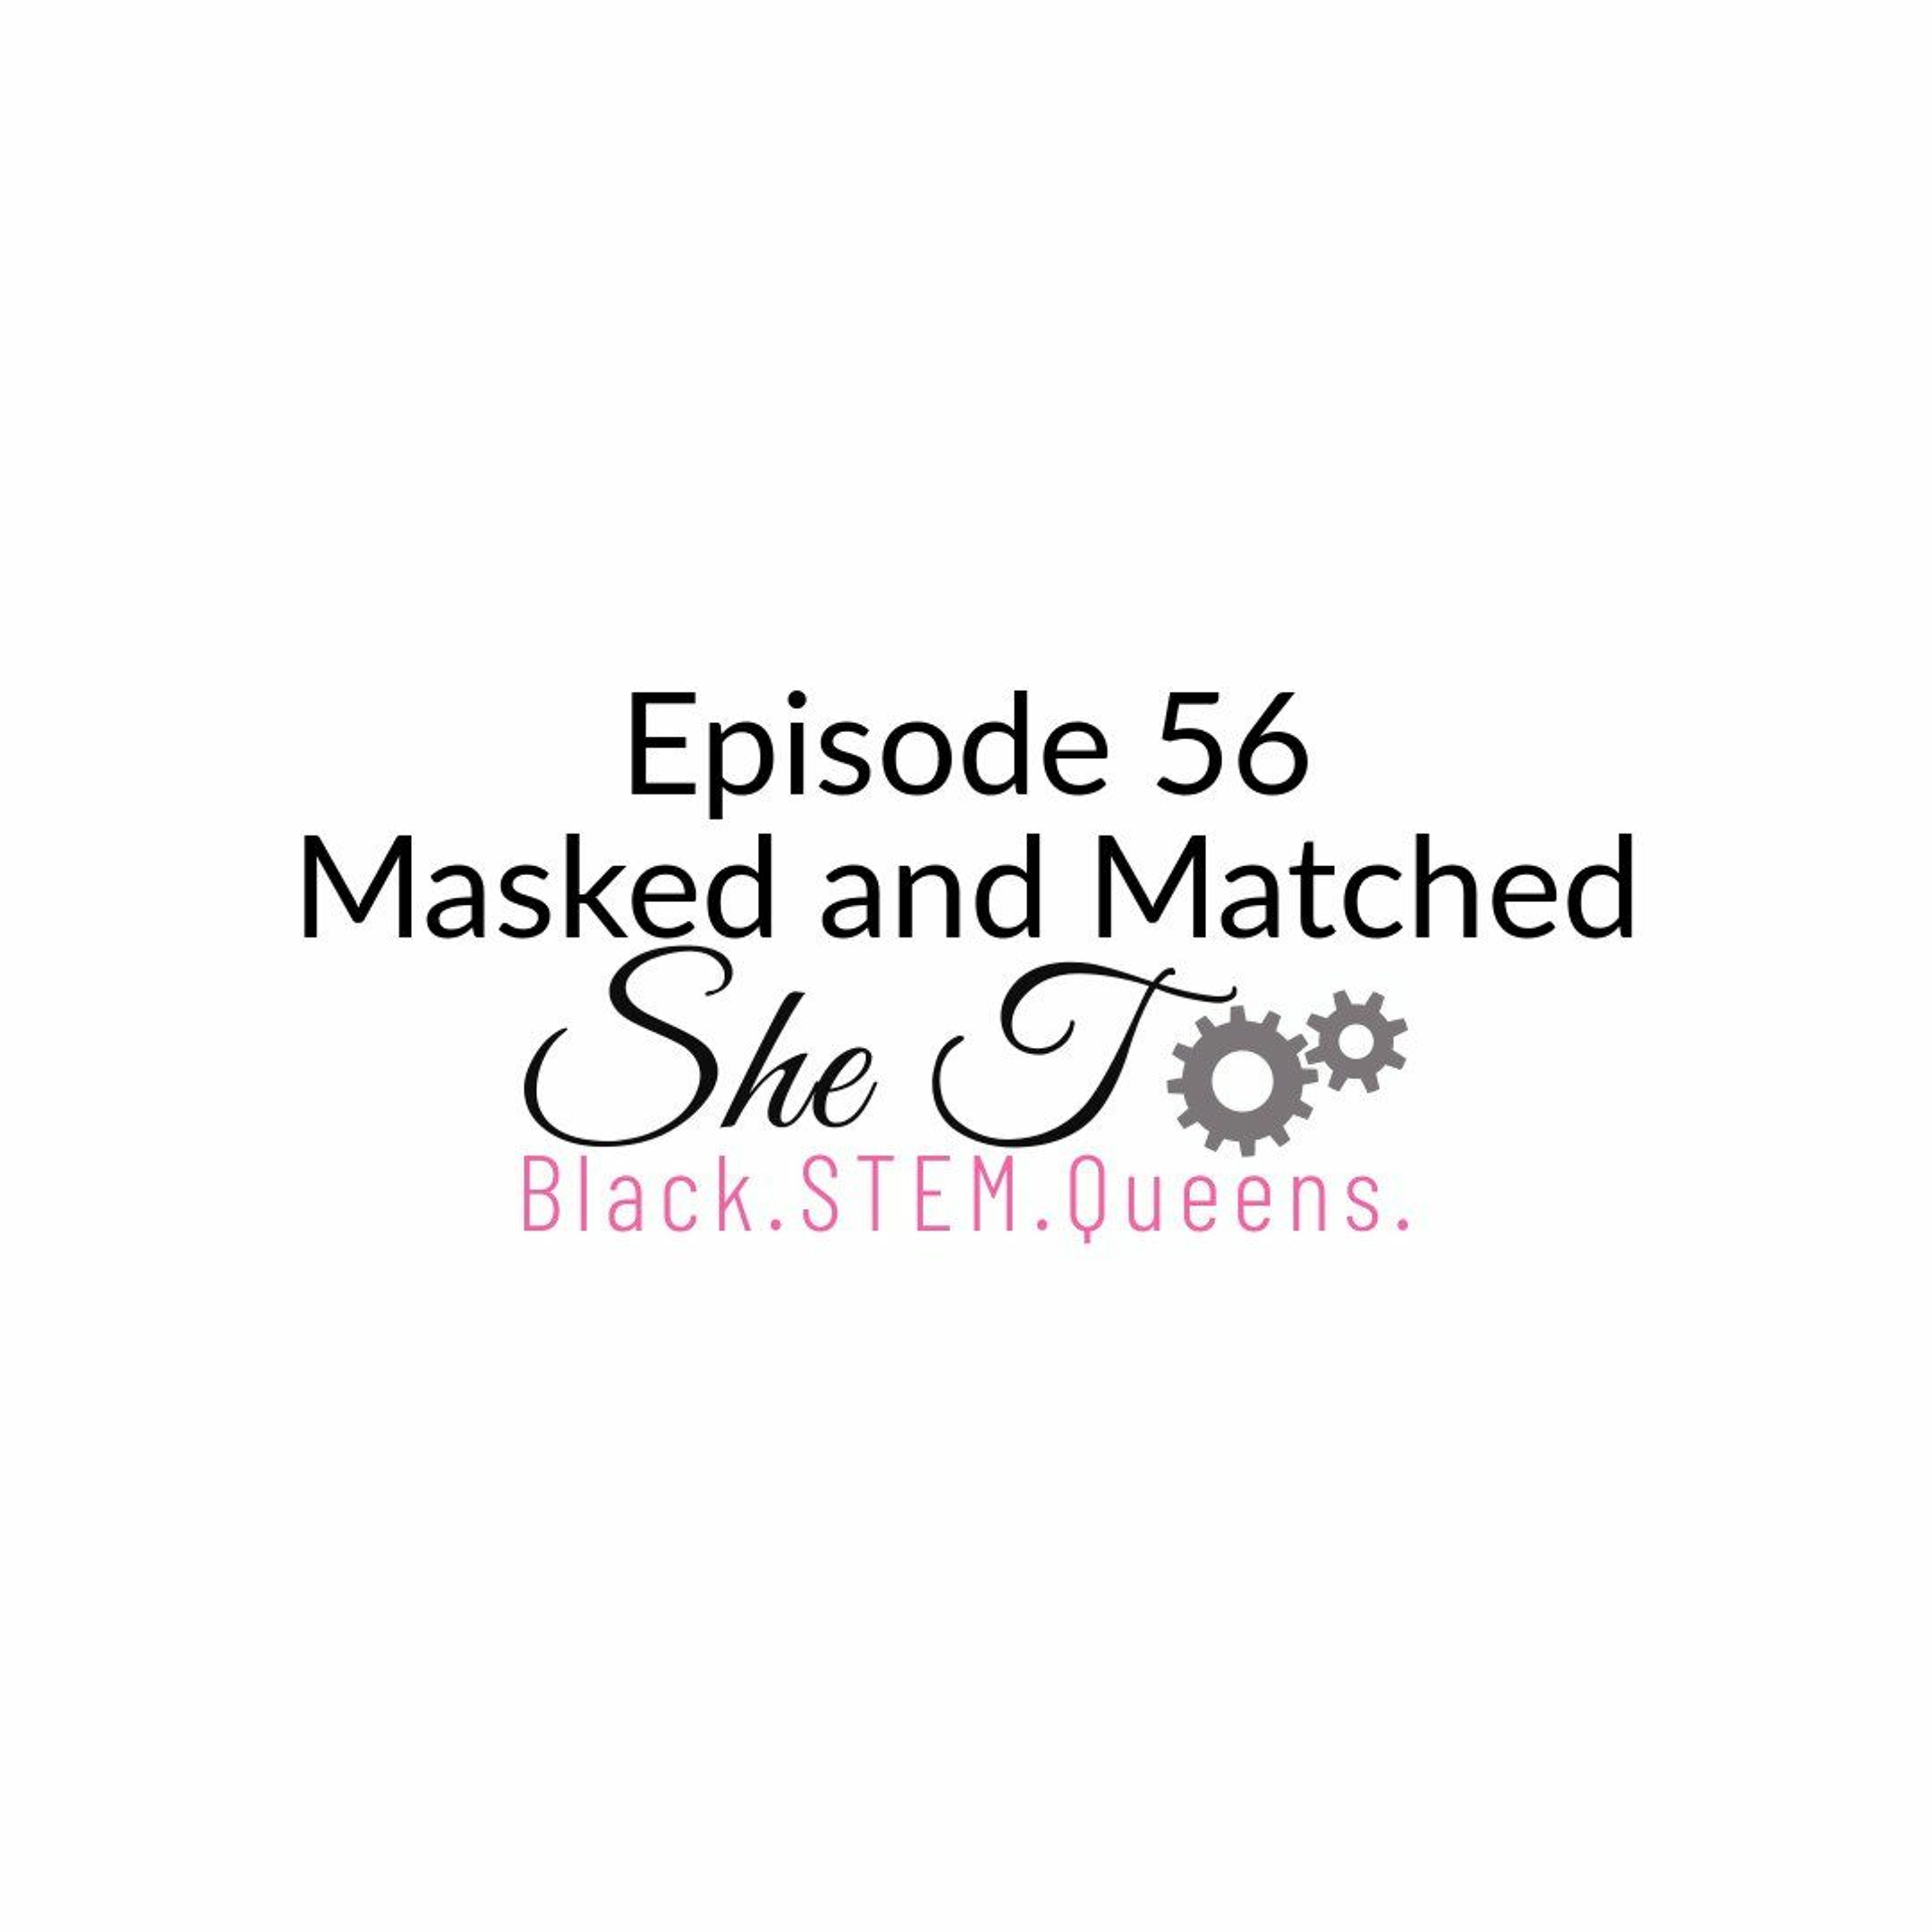 Episode 56: Masked and Matched